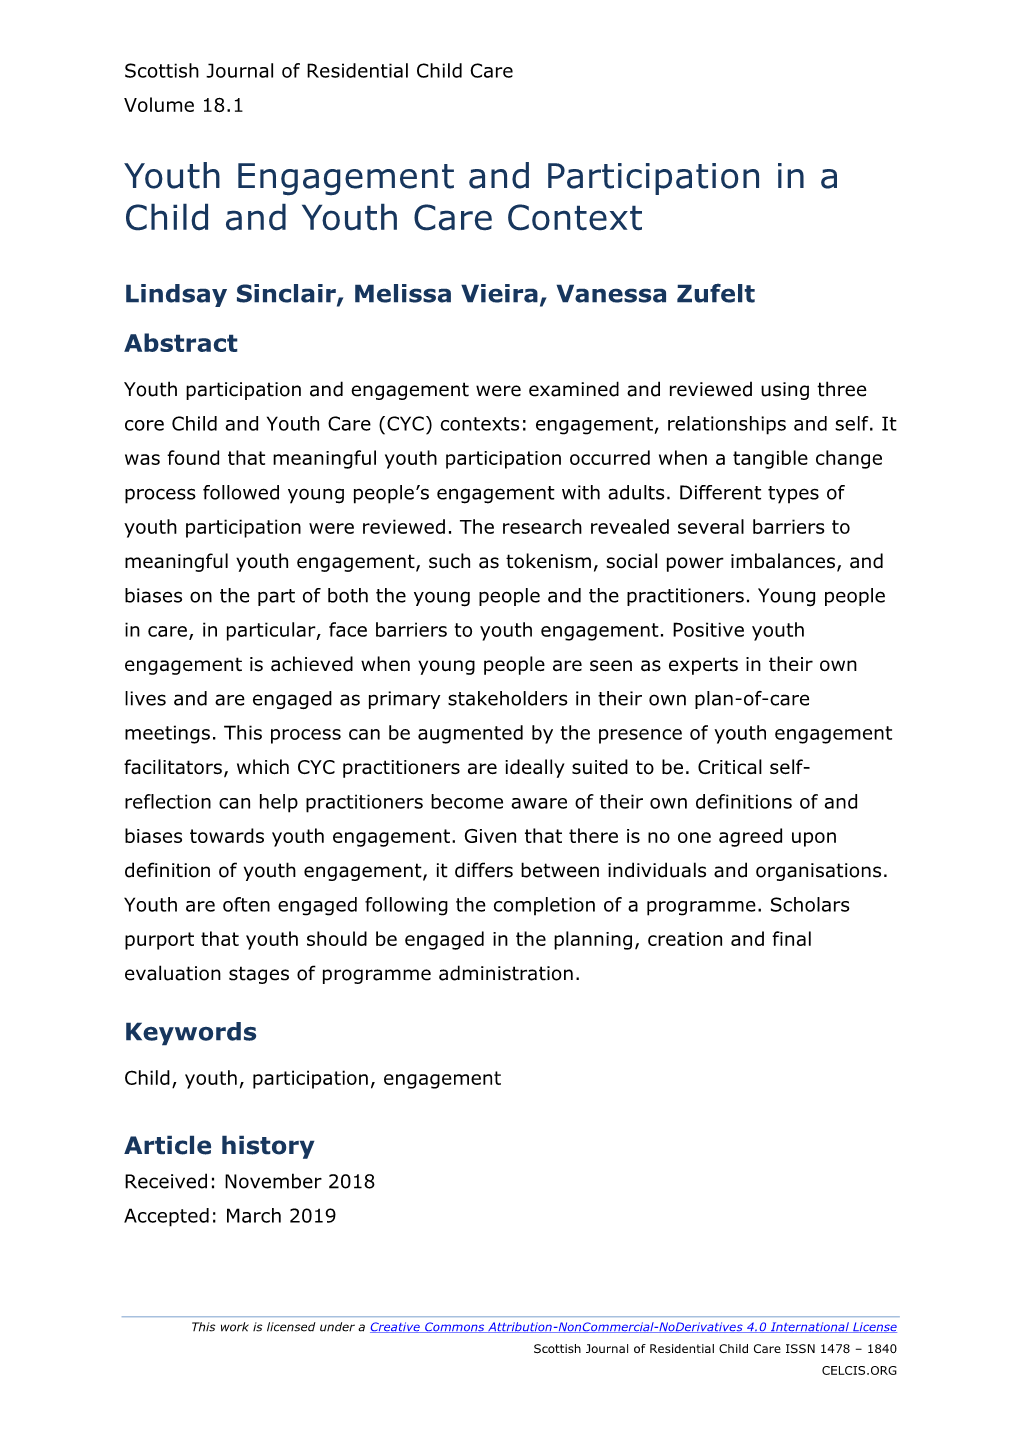 Youth Engagement and Participation in a Child and Youth Care Context